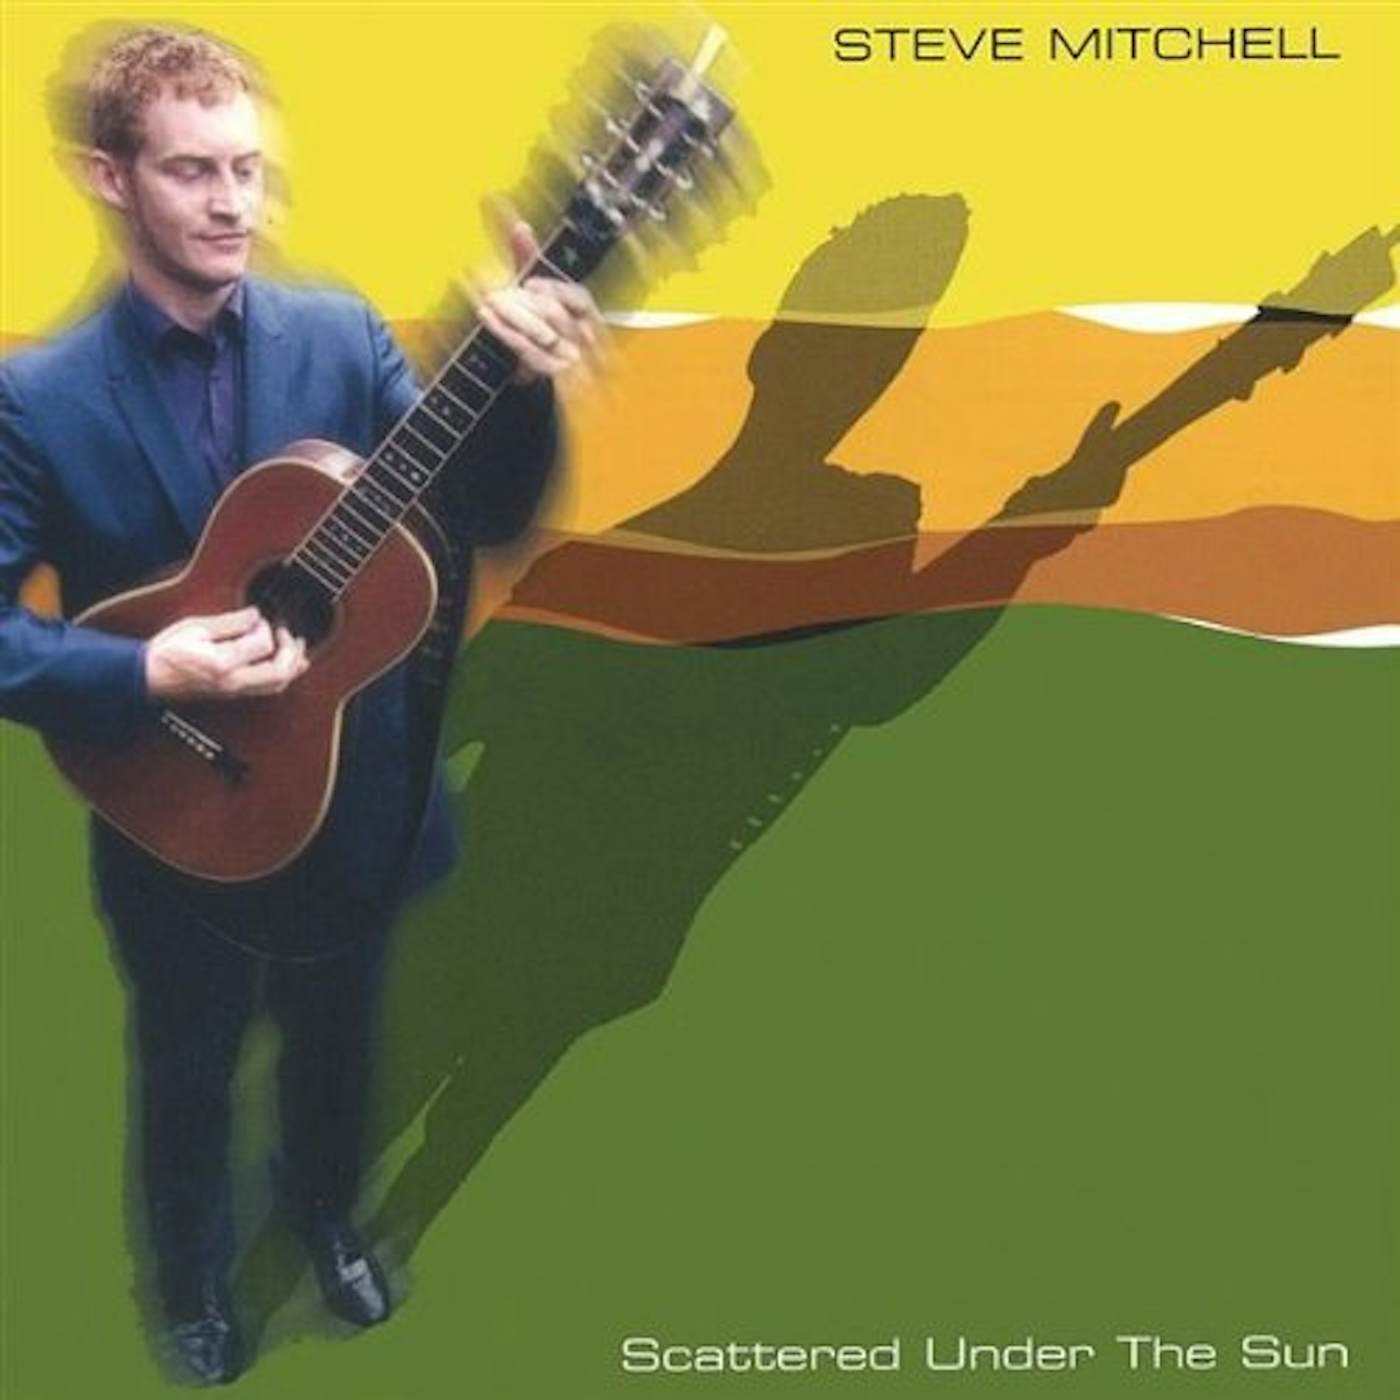 Steve Mitchell SCATTERED UNDER THE SUN CD